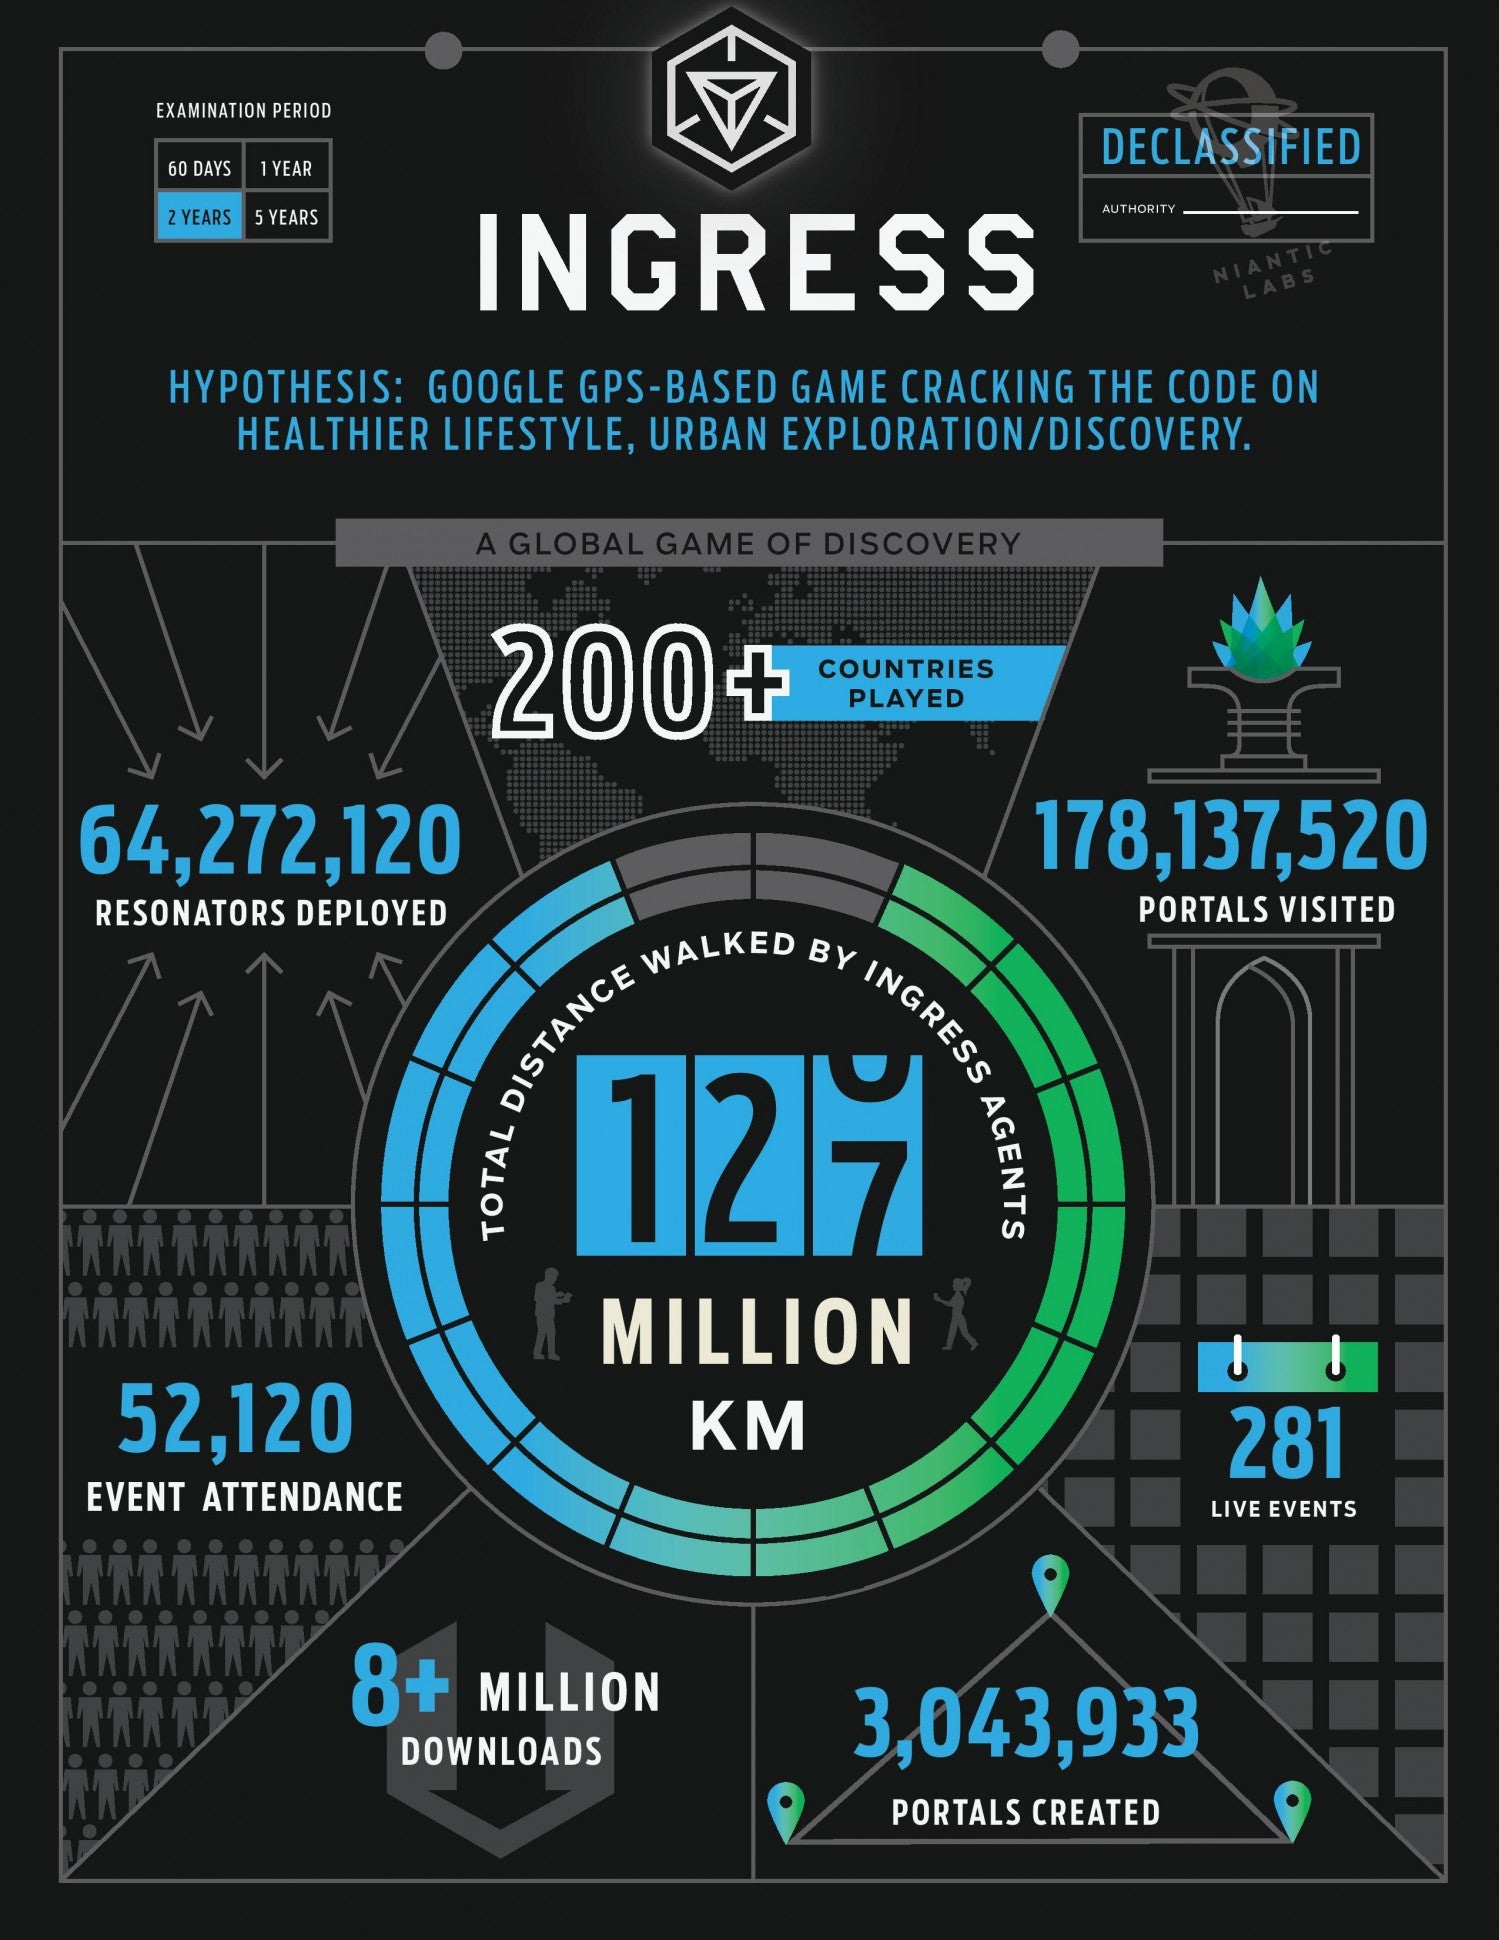 This is what users have accomplished in the two years since Ingress was released